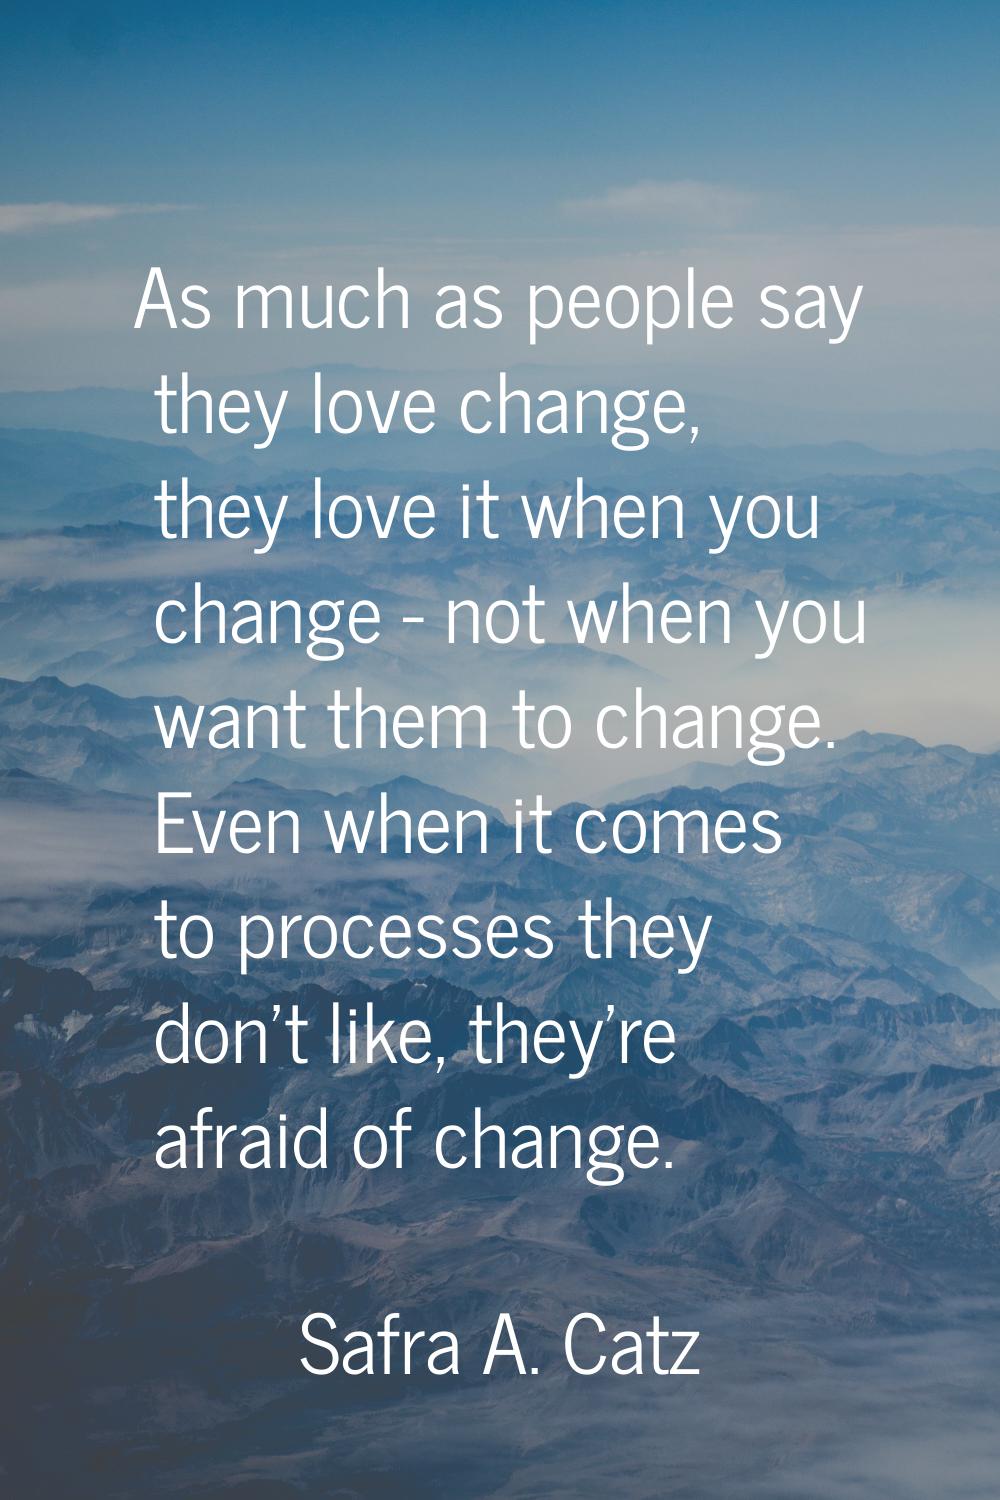 As much as people say they love change, they love it when you change - not when you want them to ch